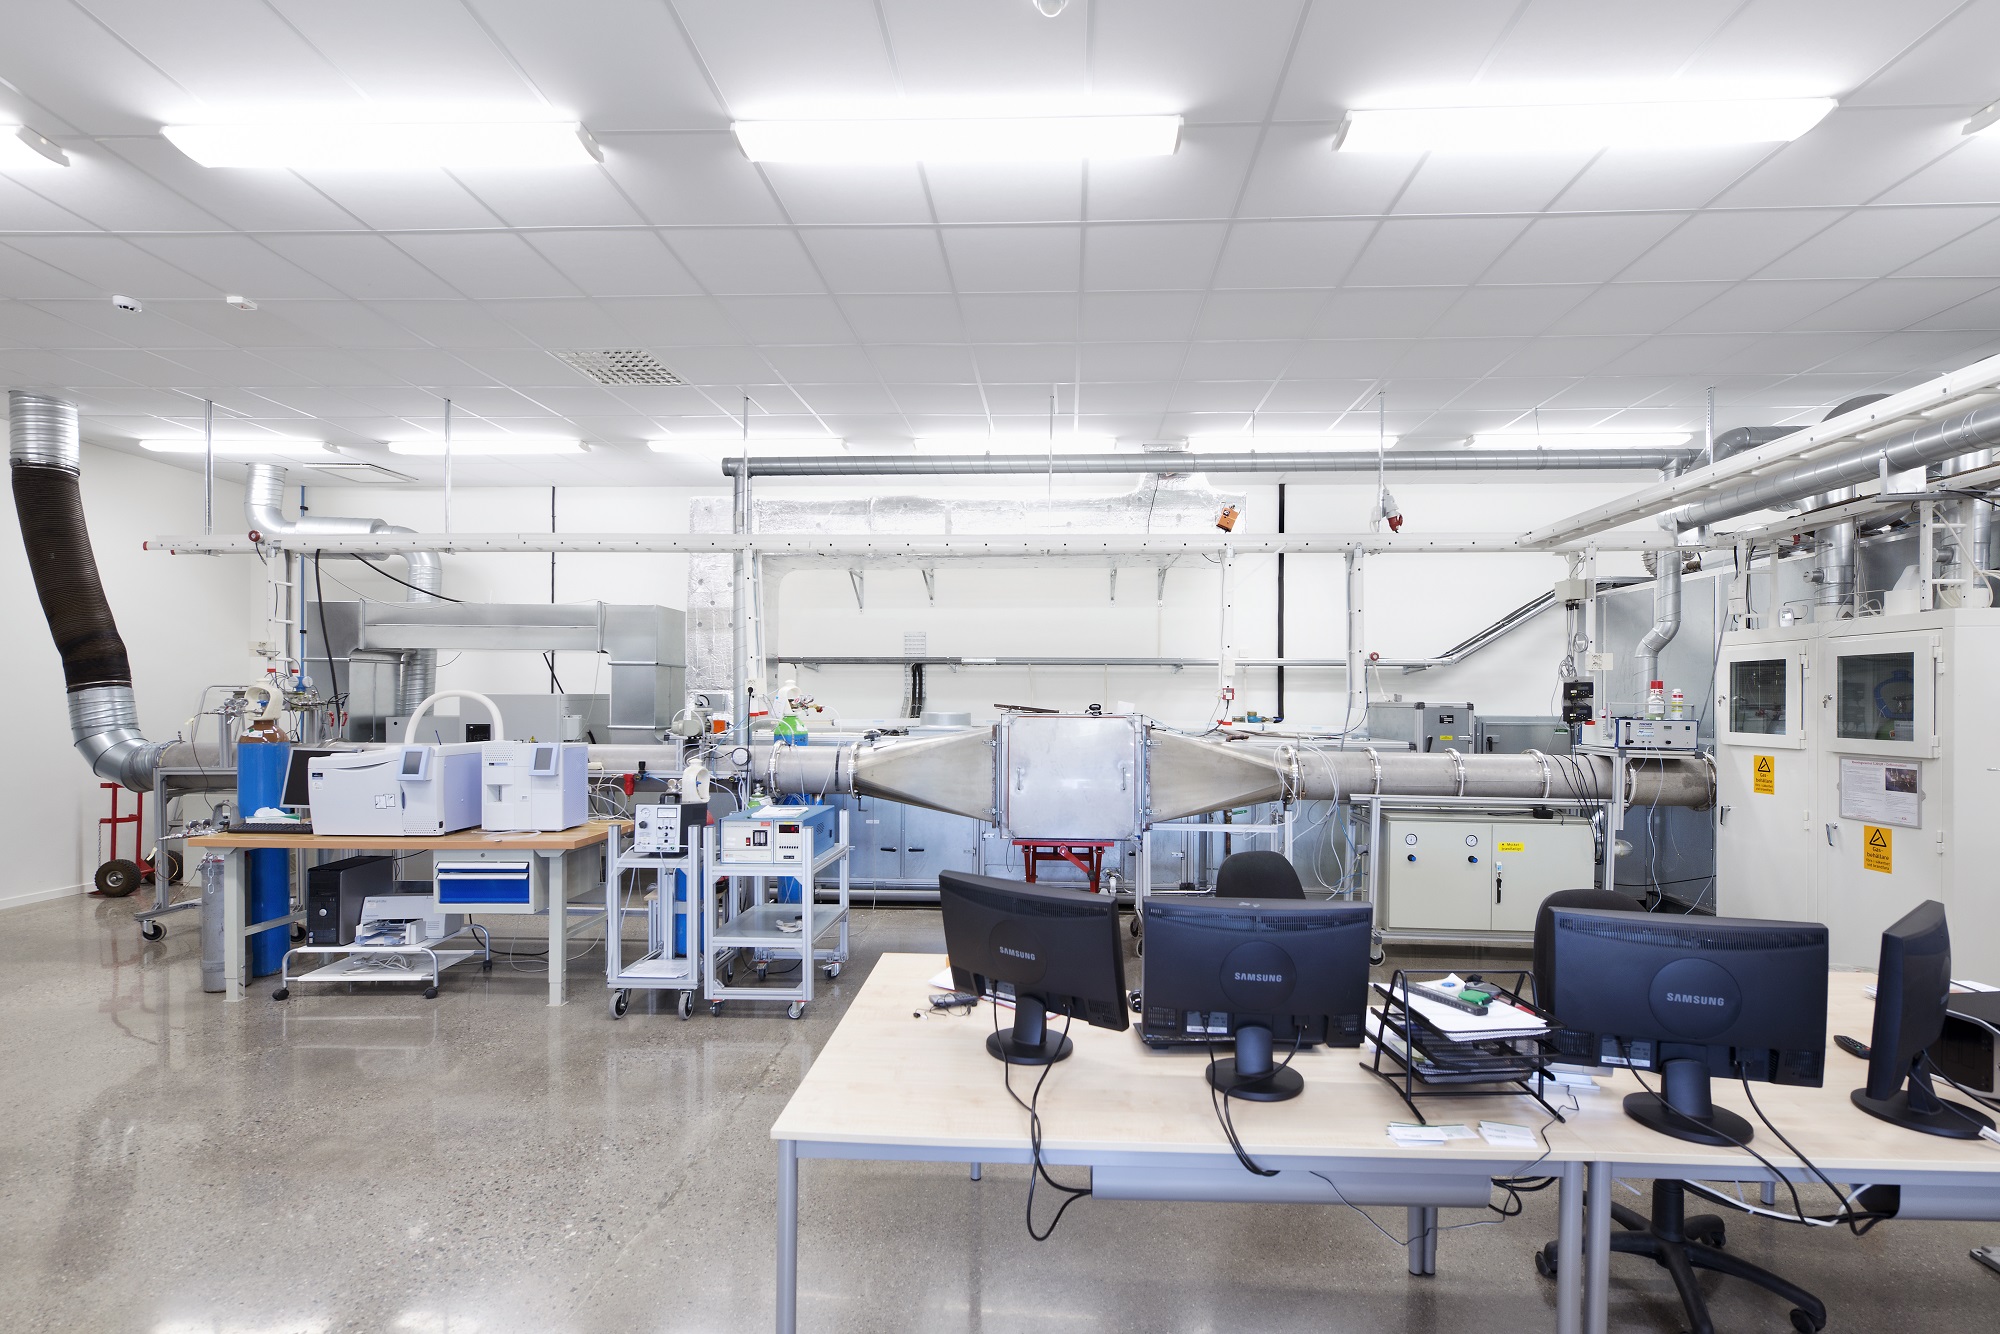 The carbon was tested at Camfil's advanced research lab in he Tech Centre in Trosa, Sweden.